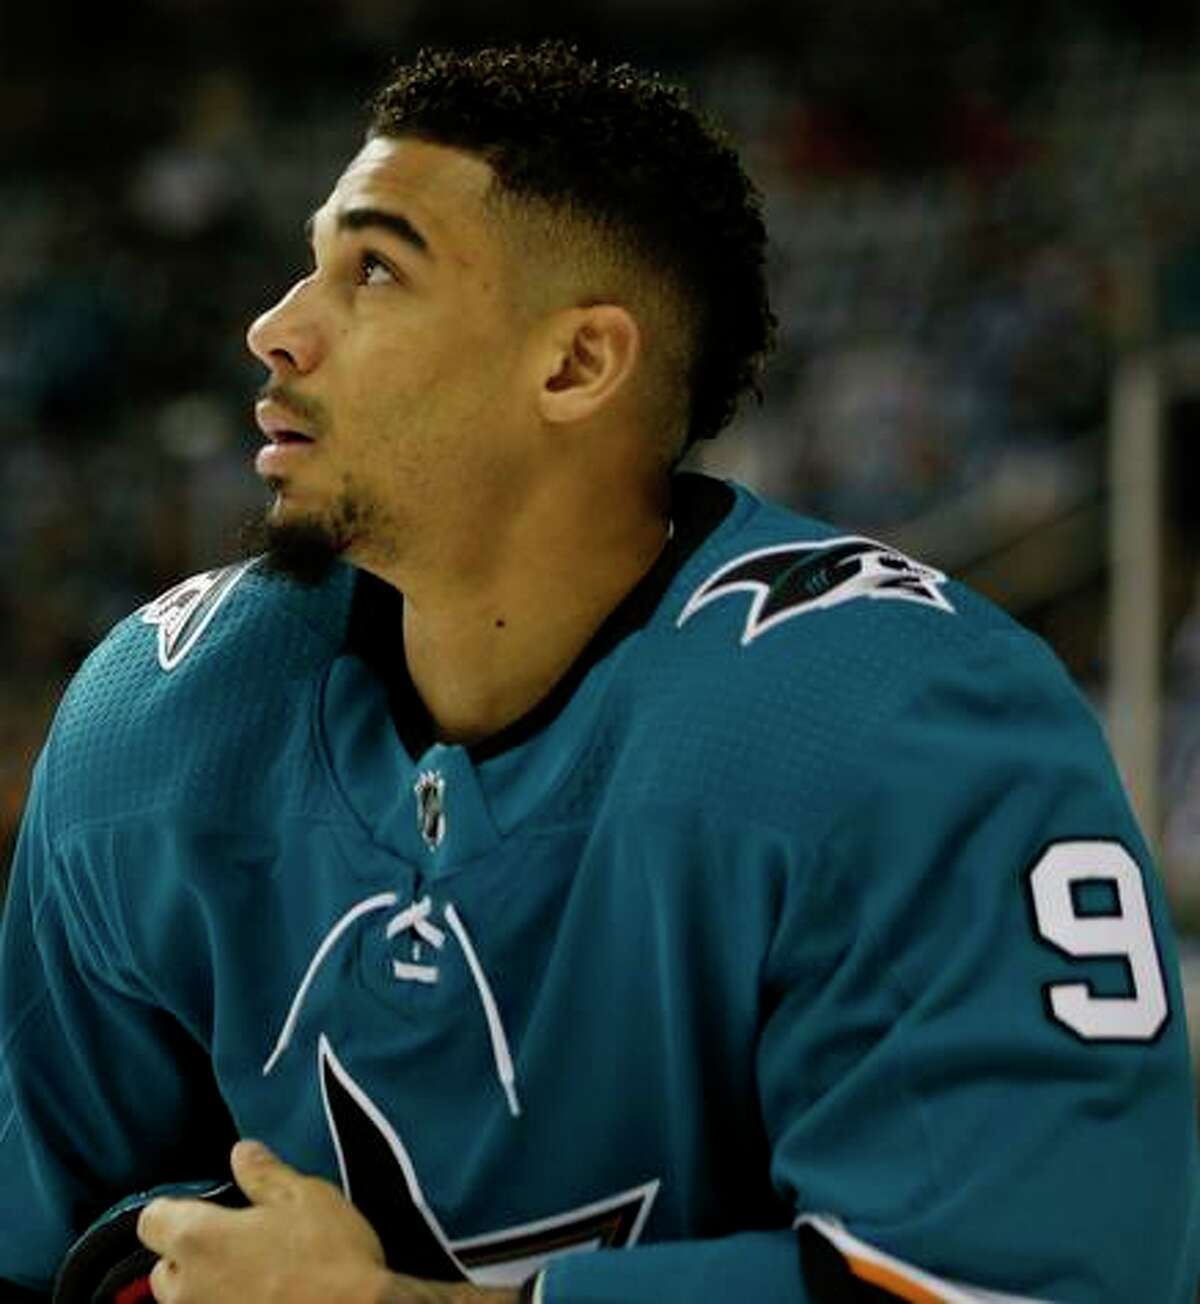 Evander Kane Likely To Be Suspended One Game For Cross-Check Of  Pierre-Edouard Bellemare 